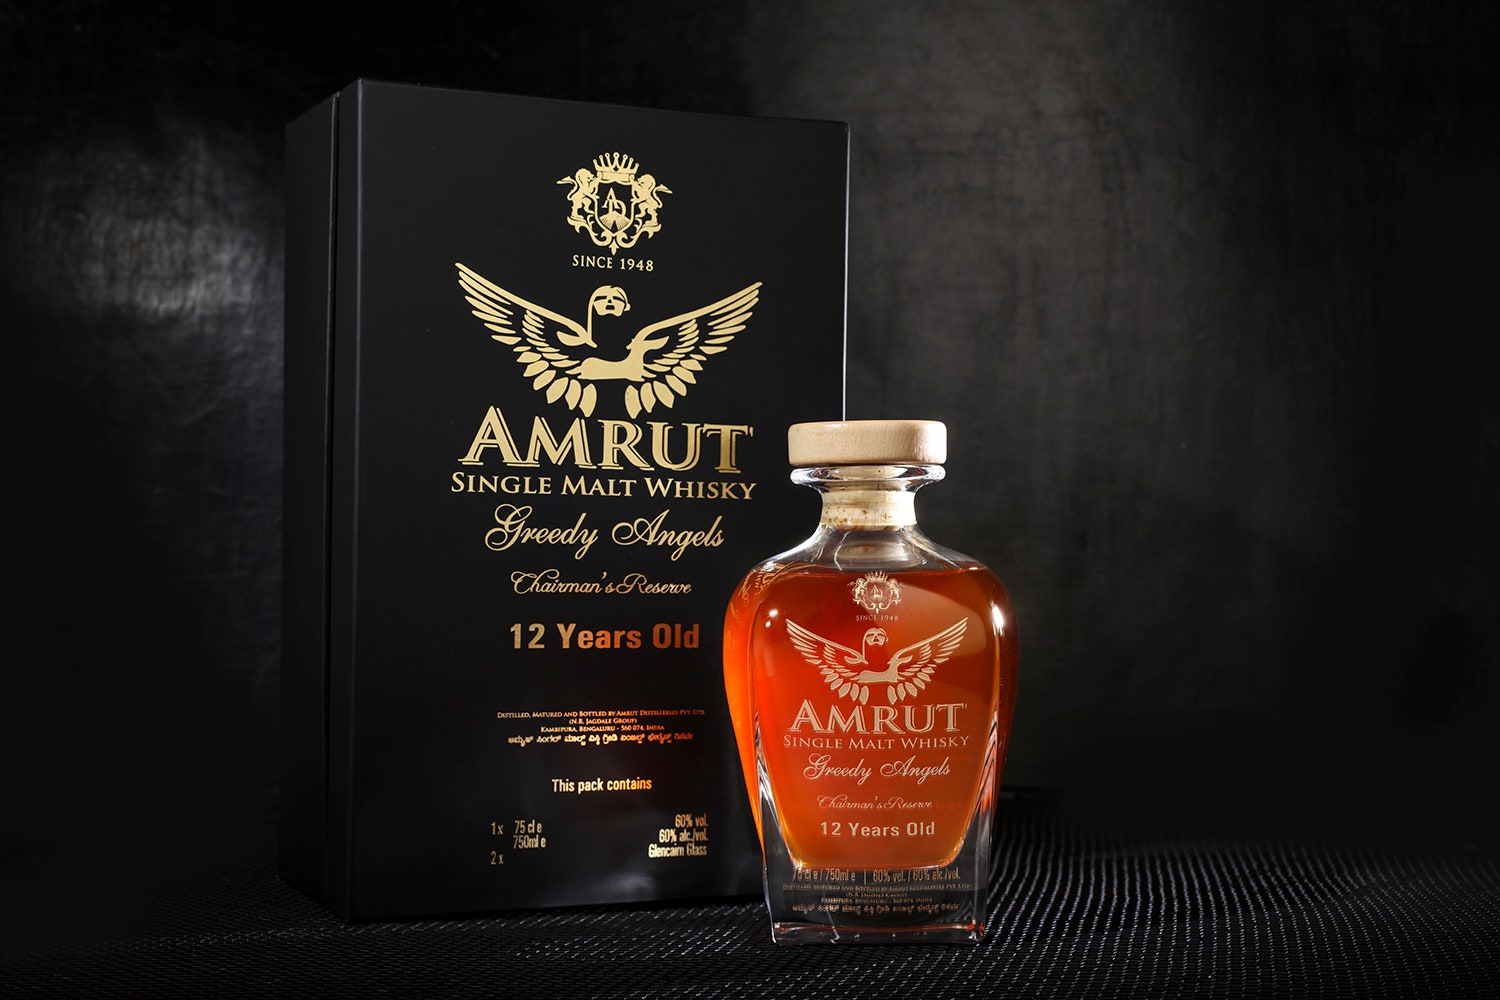 Amrut Greedy Angels Chairmans Reserve 12 Year Old